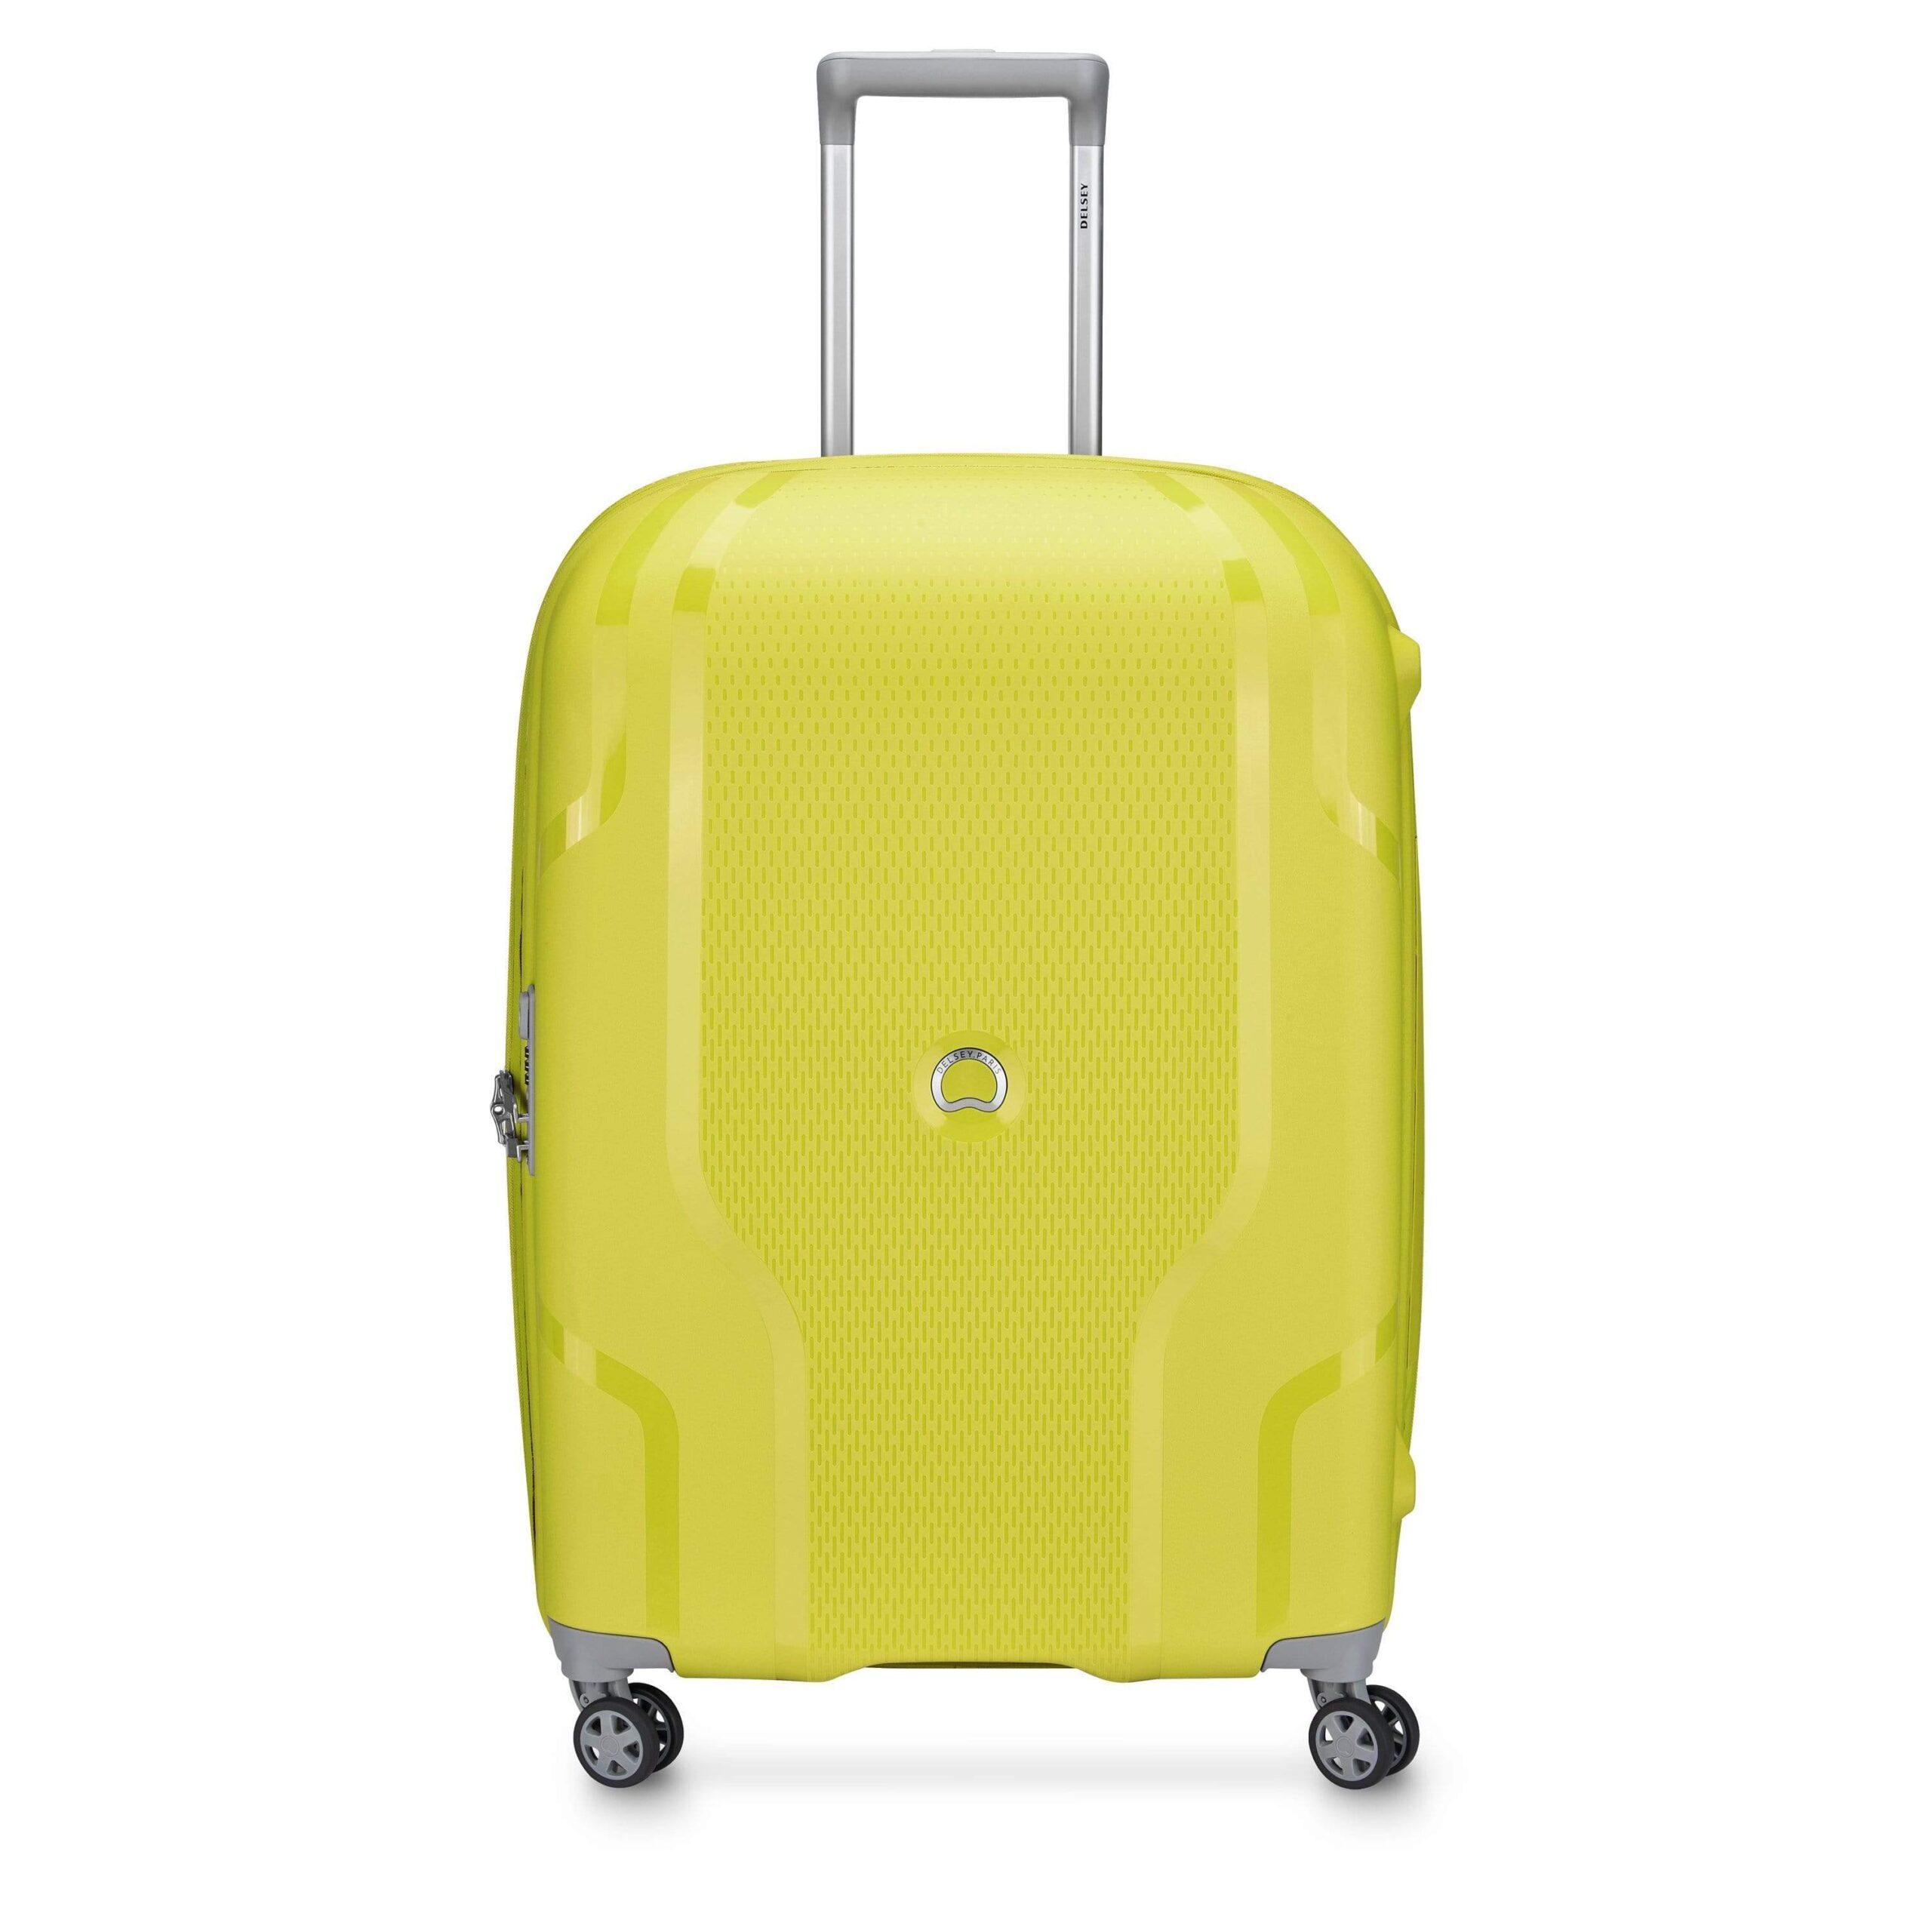 Delsey Clavel 71cm Hardcase 4 Double Wheel Expandable Check-In Luggage Trolley Lemon - 00384582015